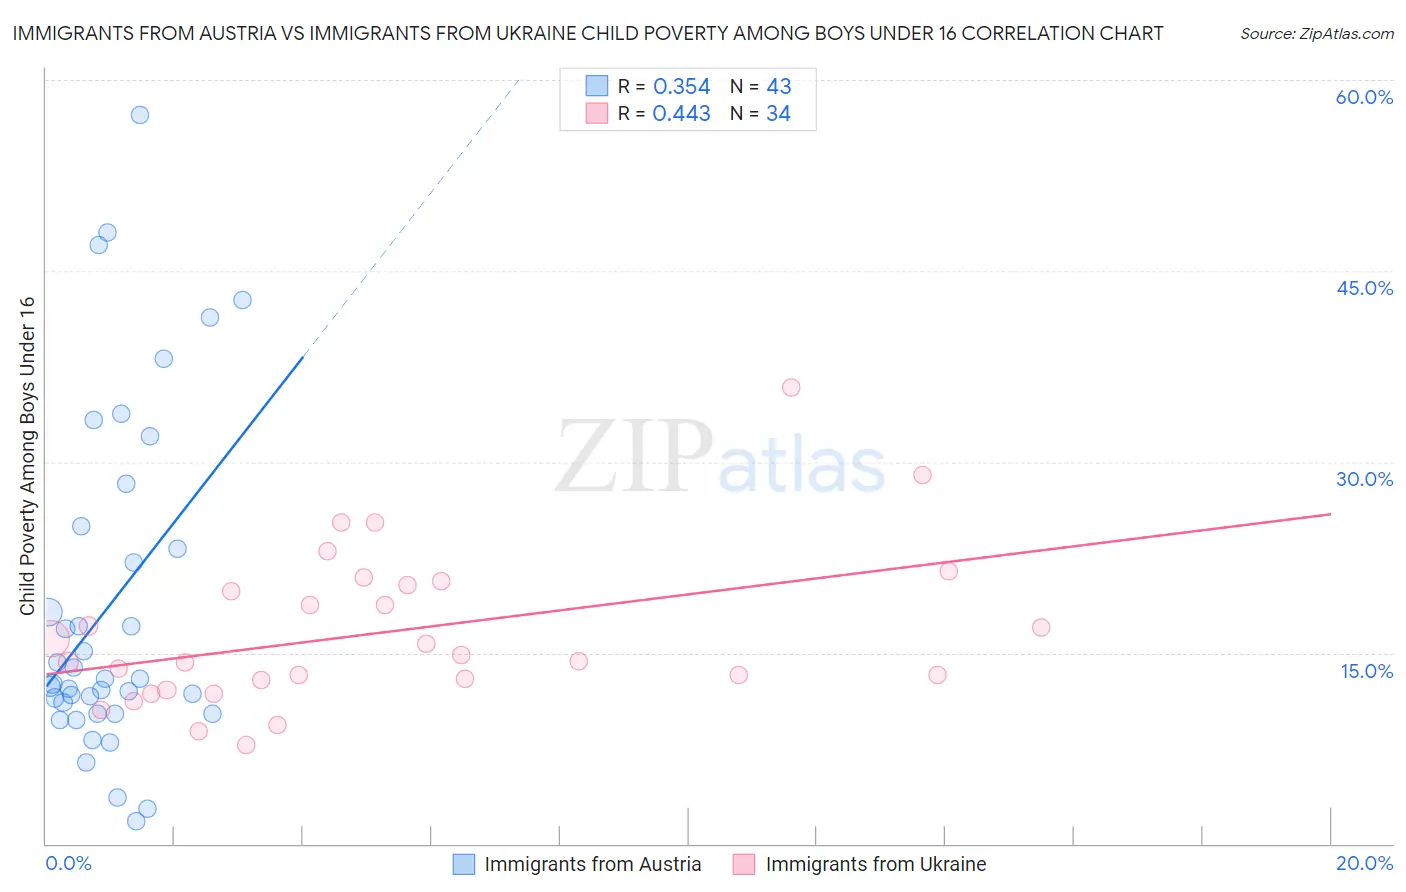 Immigrants from Austria vs Immigrants from Ukraine Child Poverty Among Boys Under 16